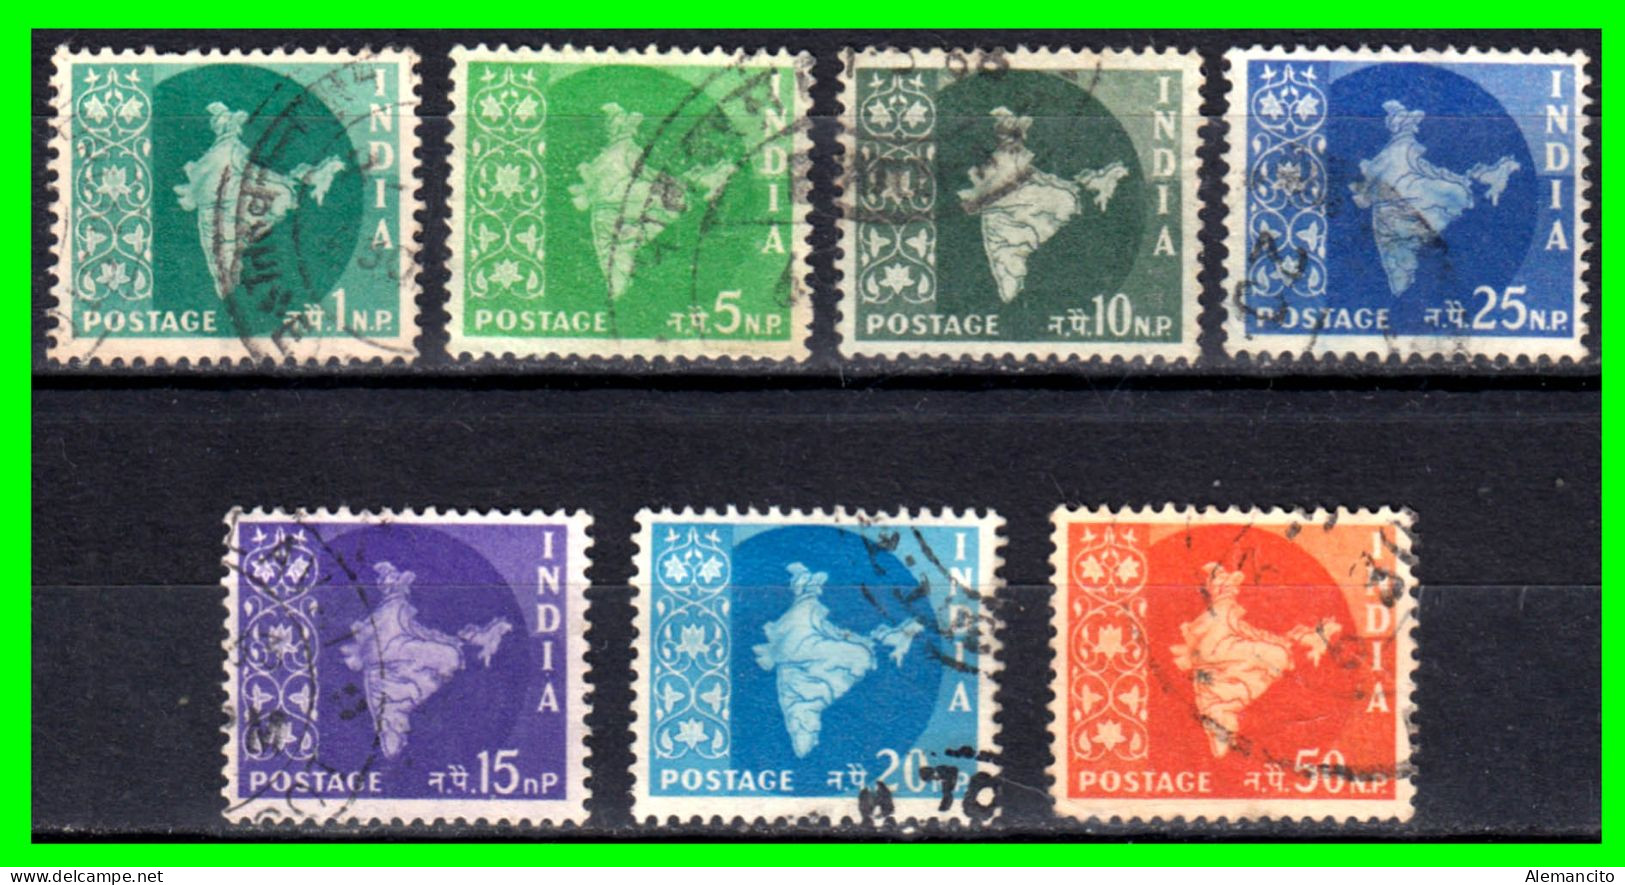 INDIA – ( ASIA ) – LOTE 7 SELLOS DIFERENTES VALORES DEL AÑO 1957 - Used Stamps